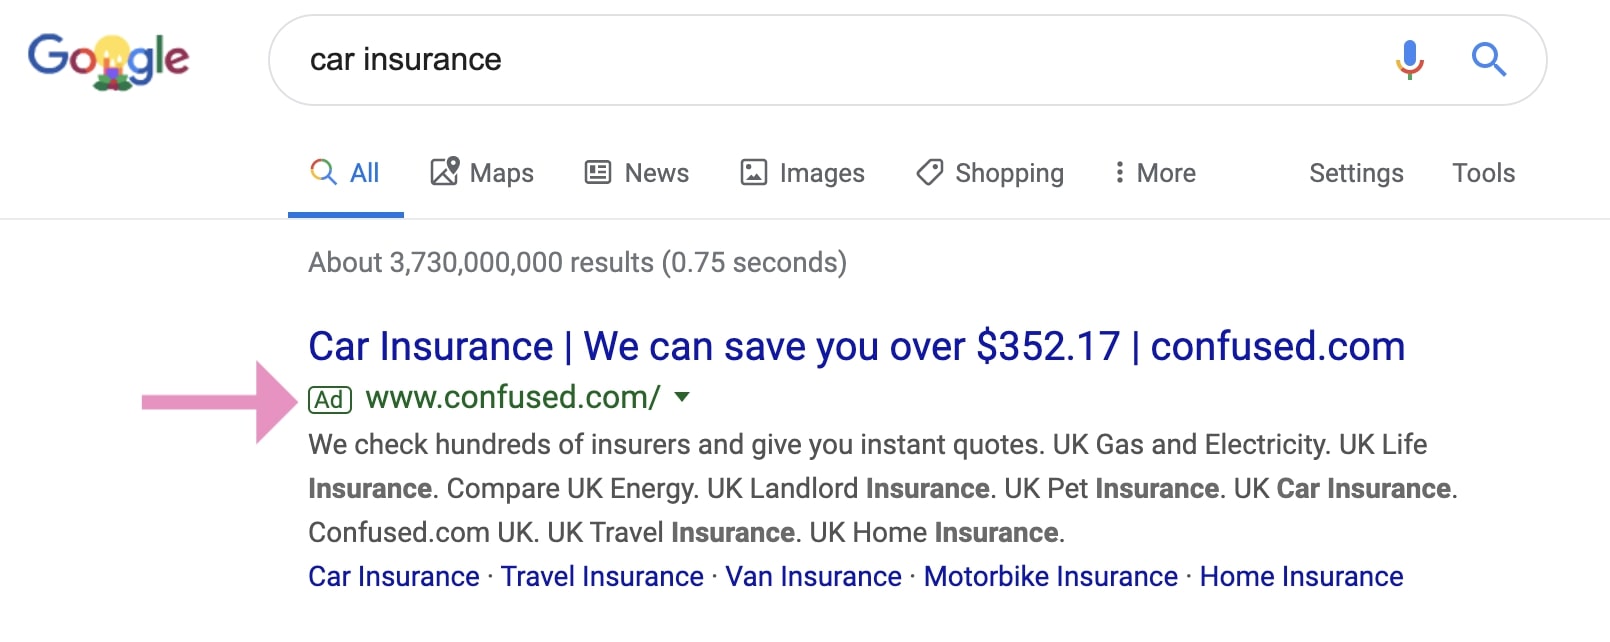 Paid Search Google Ad on desktop